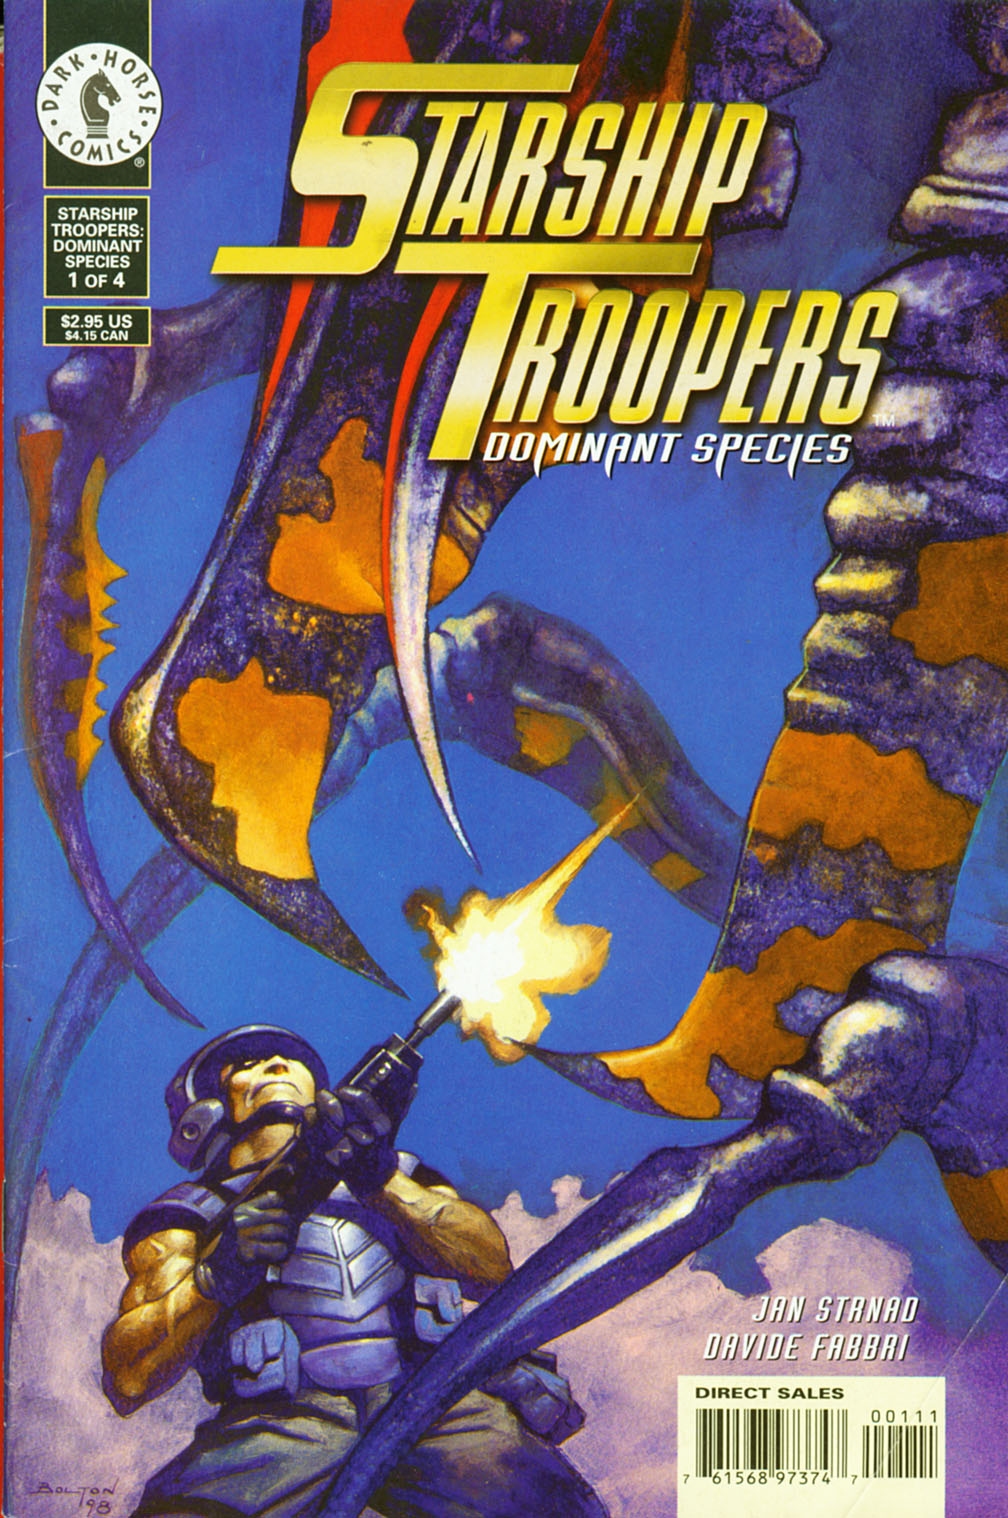 Read online Starship Troopers: Dominant Species comic -  Issue #1 - 1